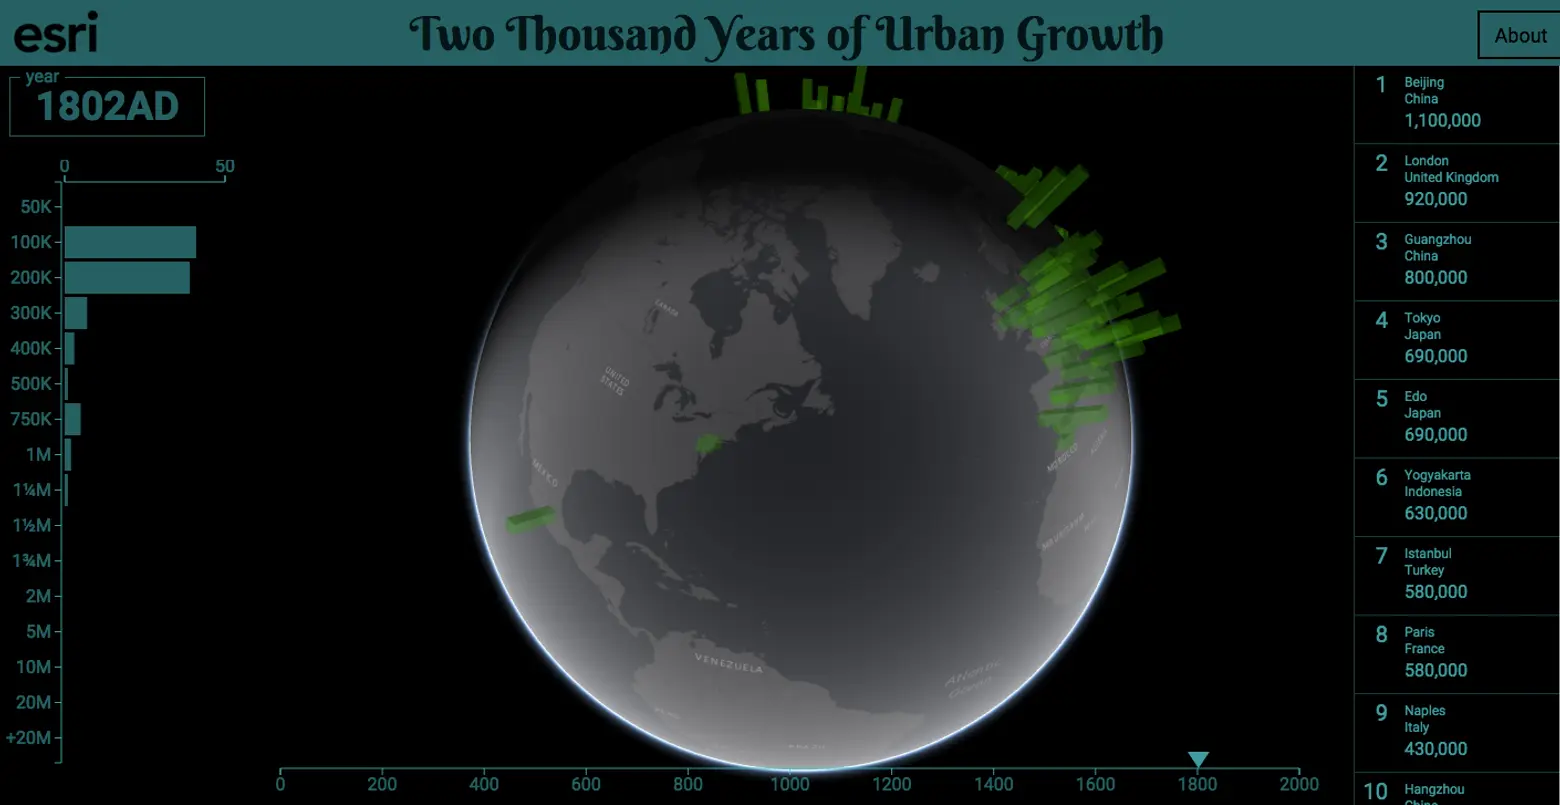 2000 years of poulation growth